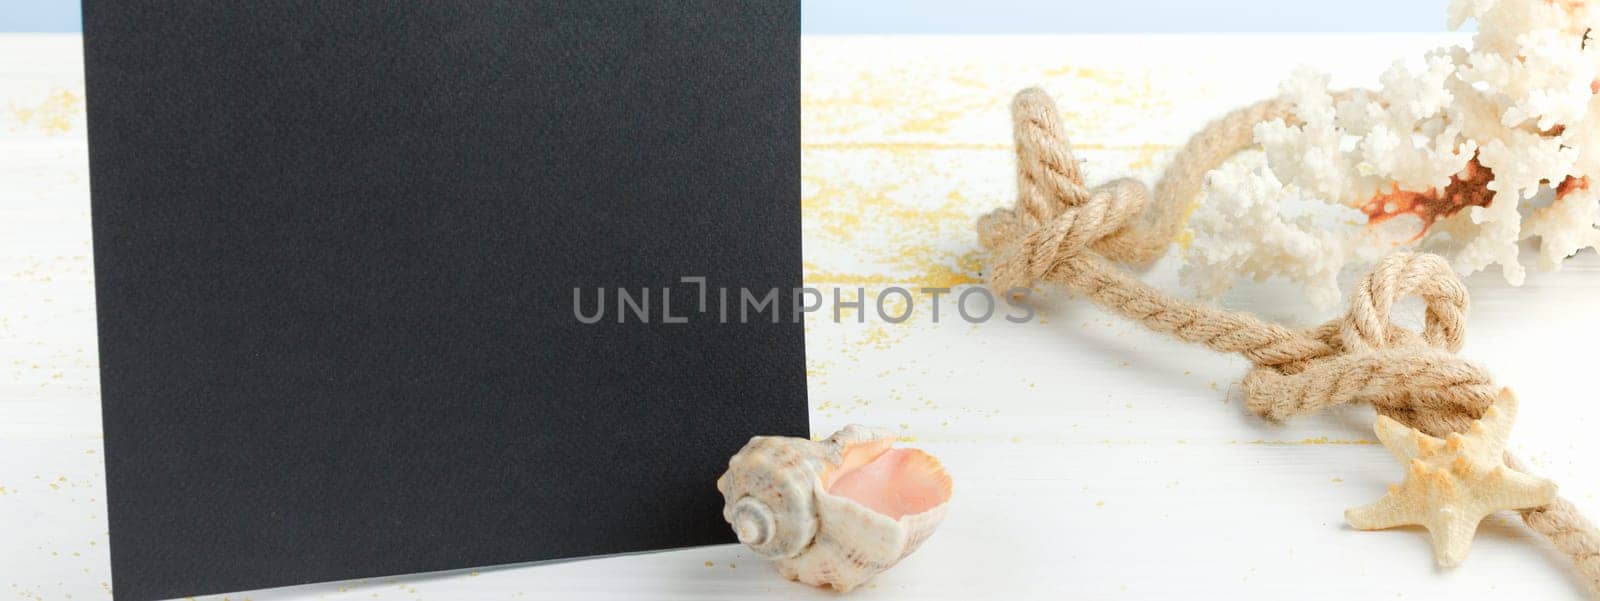 Black board on white wooden table with copyspace. Starfish and seashells with rope. Beach service banner.